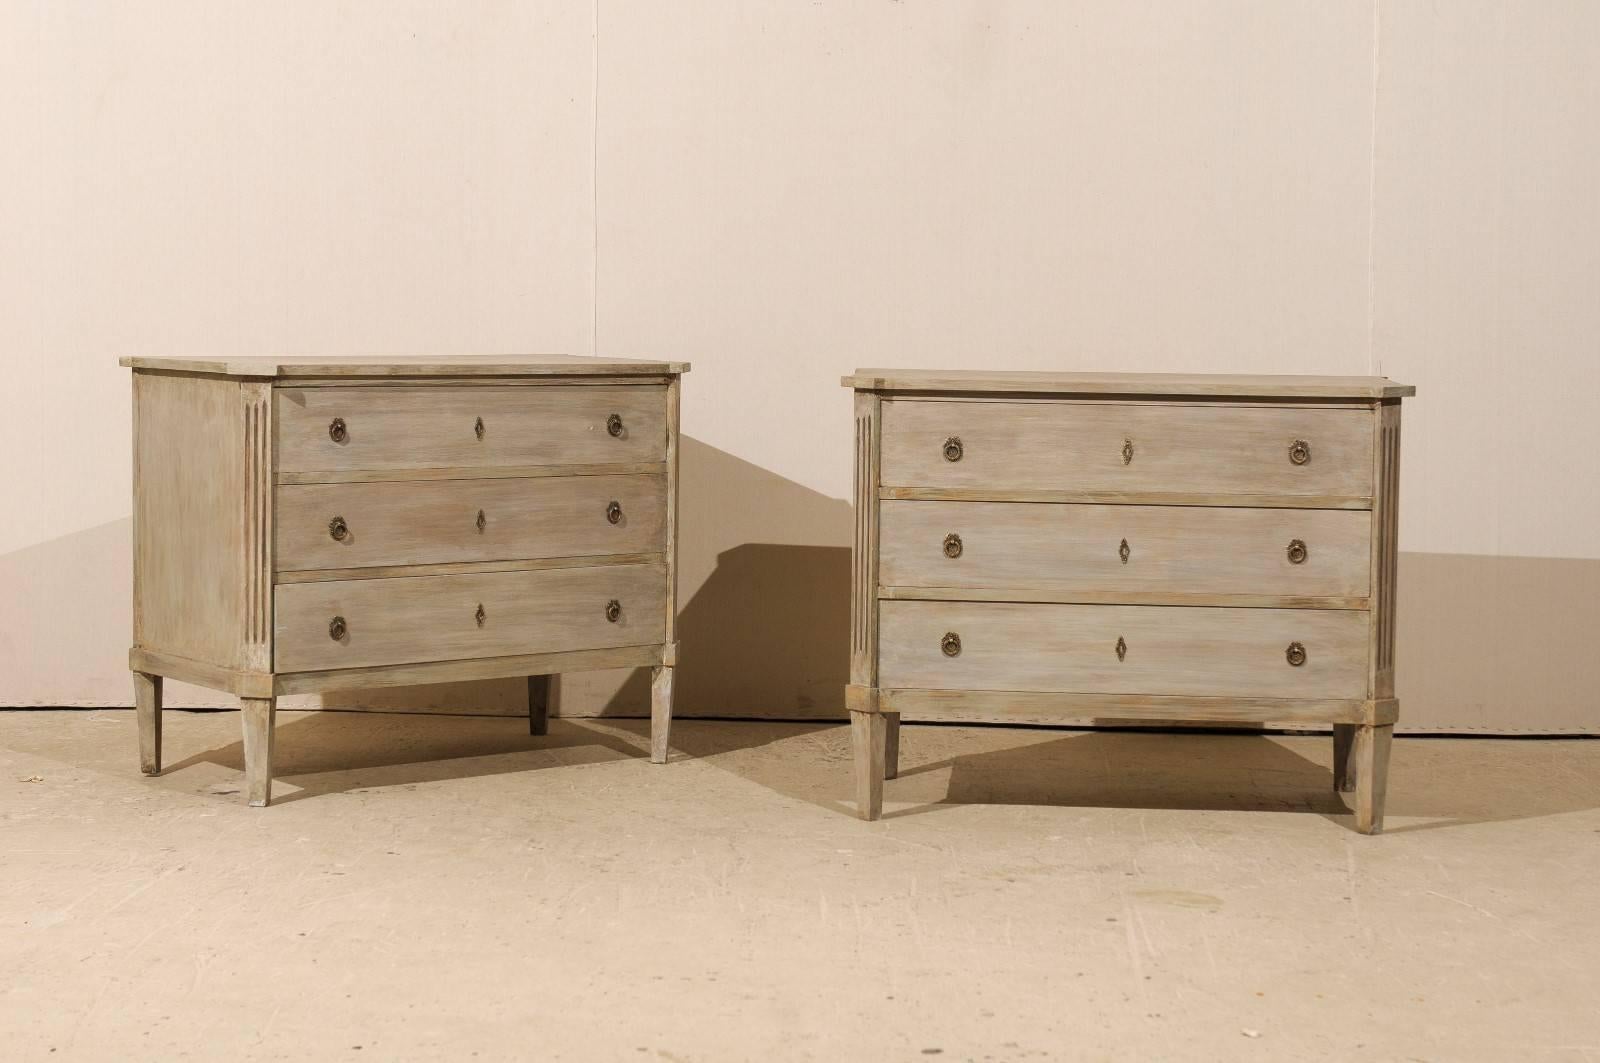 A pair of Swedish three-drawer chests. This pair of vintage Swedish painted wood chests from the mid-20th century features clean simple lines softened by the fluted and canted side posts and bevelled legs. The slightly overhanging top mimics in its